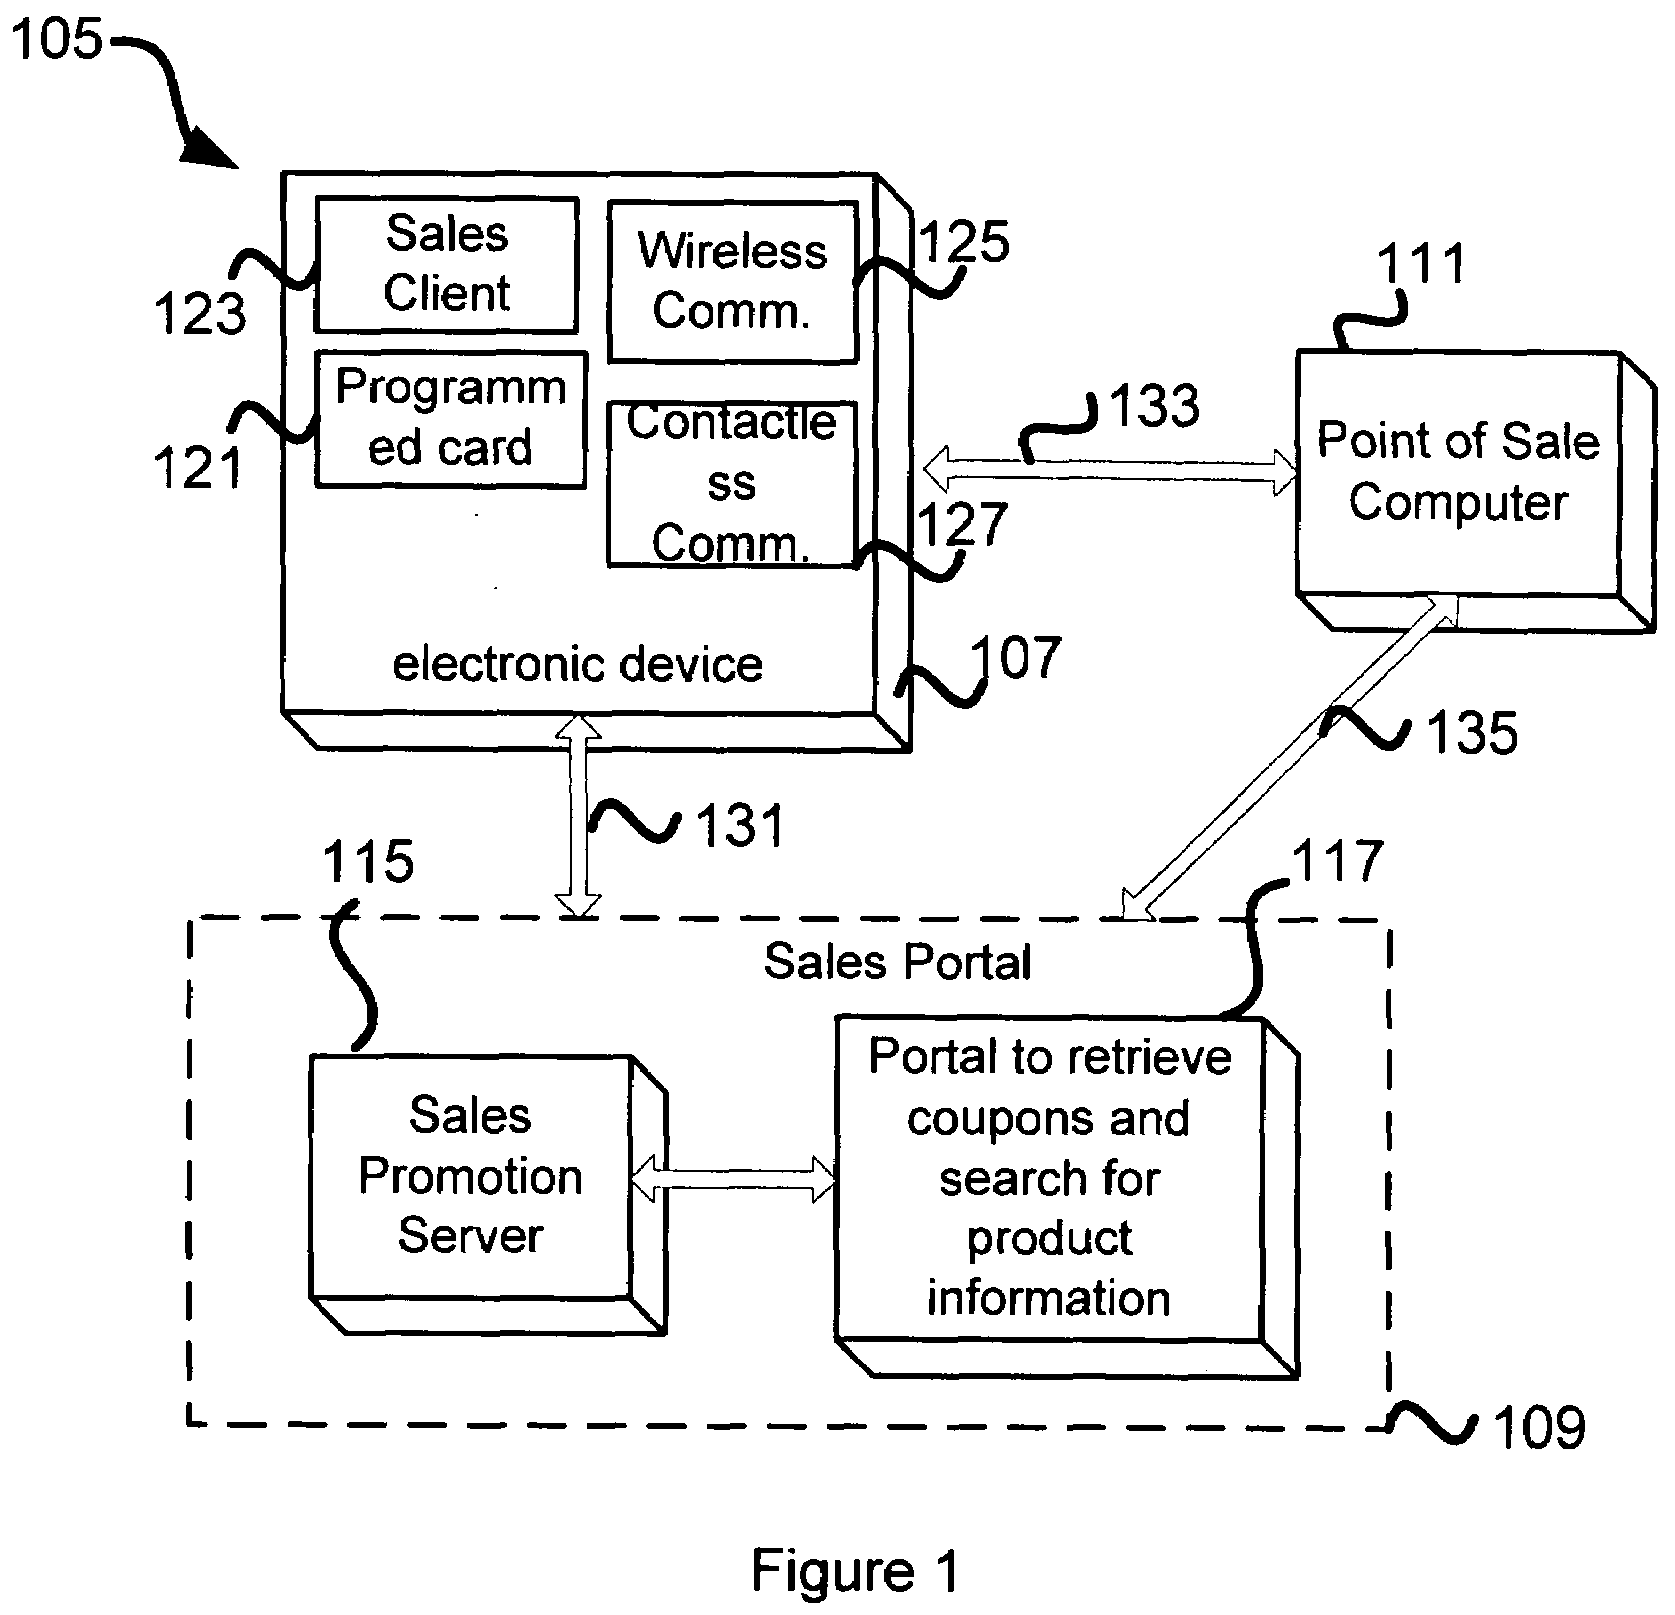 Electronic device capable of delivering coupons to a POS system and to a sales server